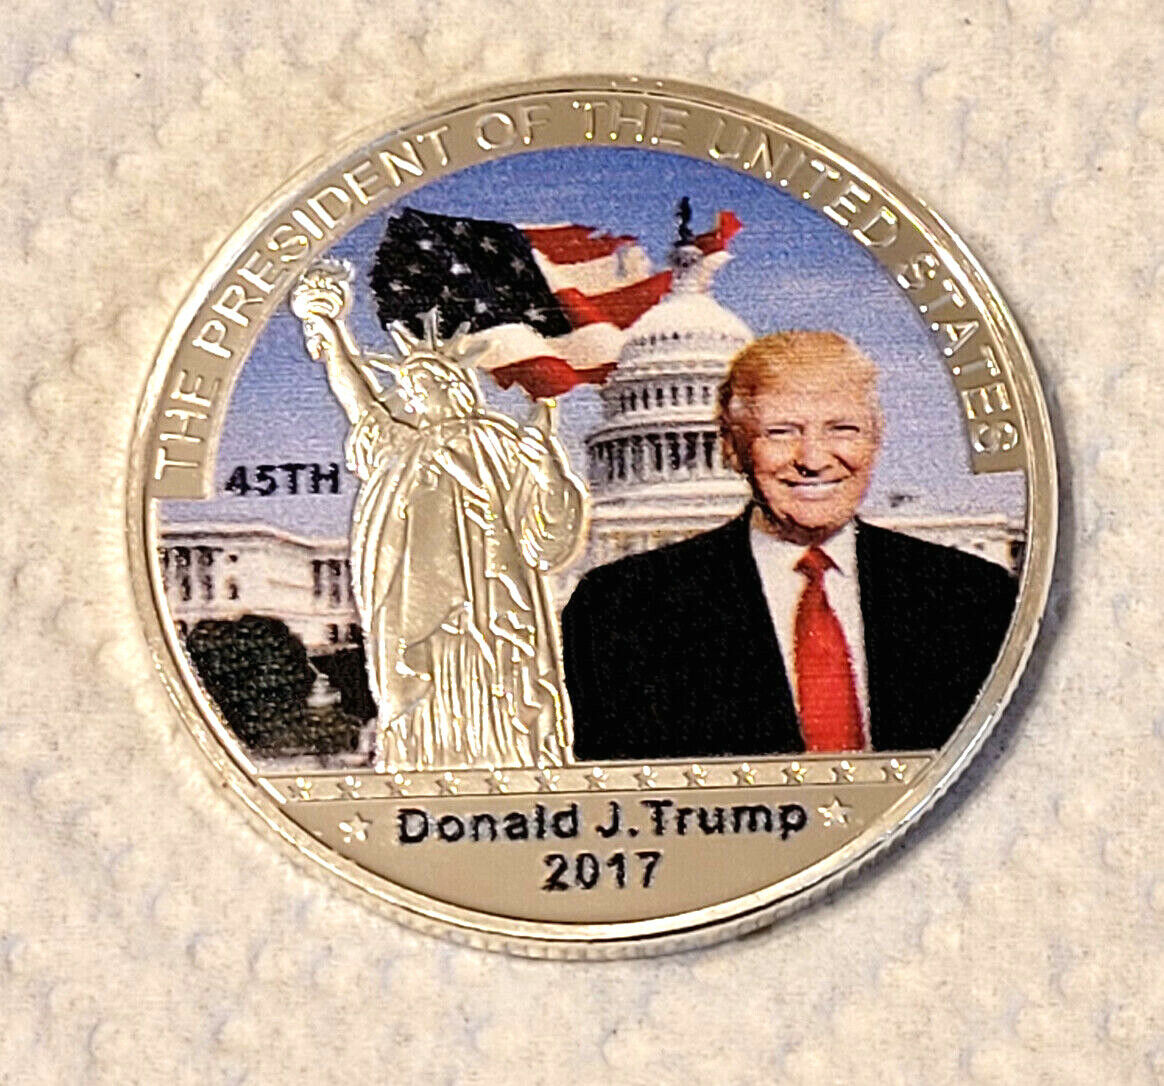 Donald Trump 2017 Inauguration 999 Silver Plated Proof Coin MAGA Note